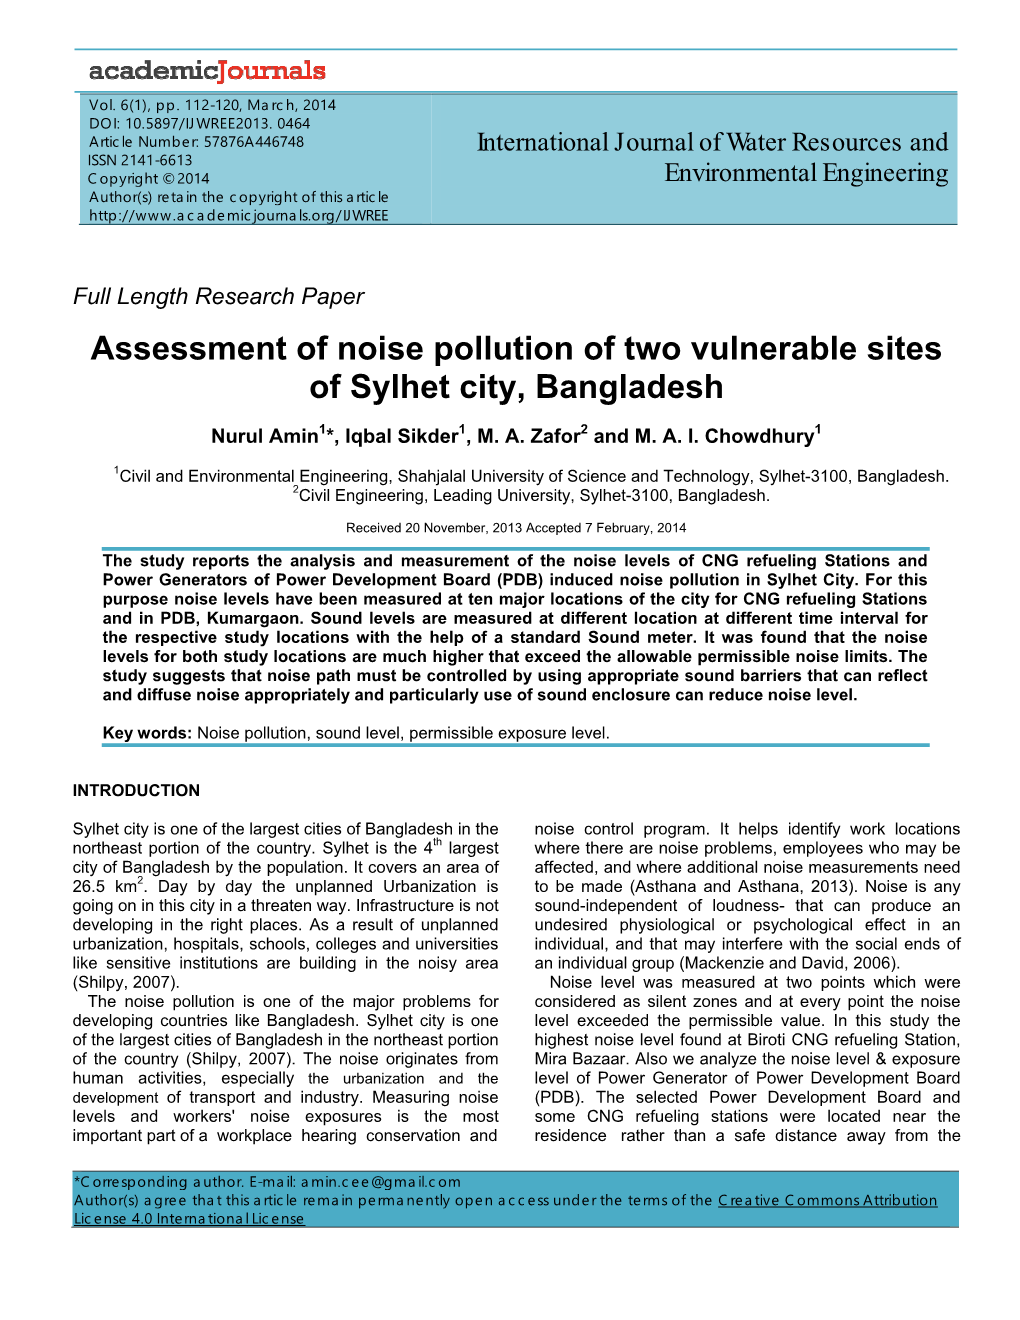 Assessment of Noise Pollution of Two Vulnerable Sites of Sylhet City, Bangladesh